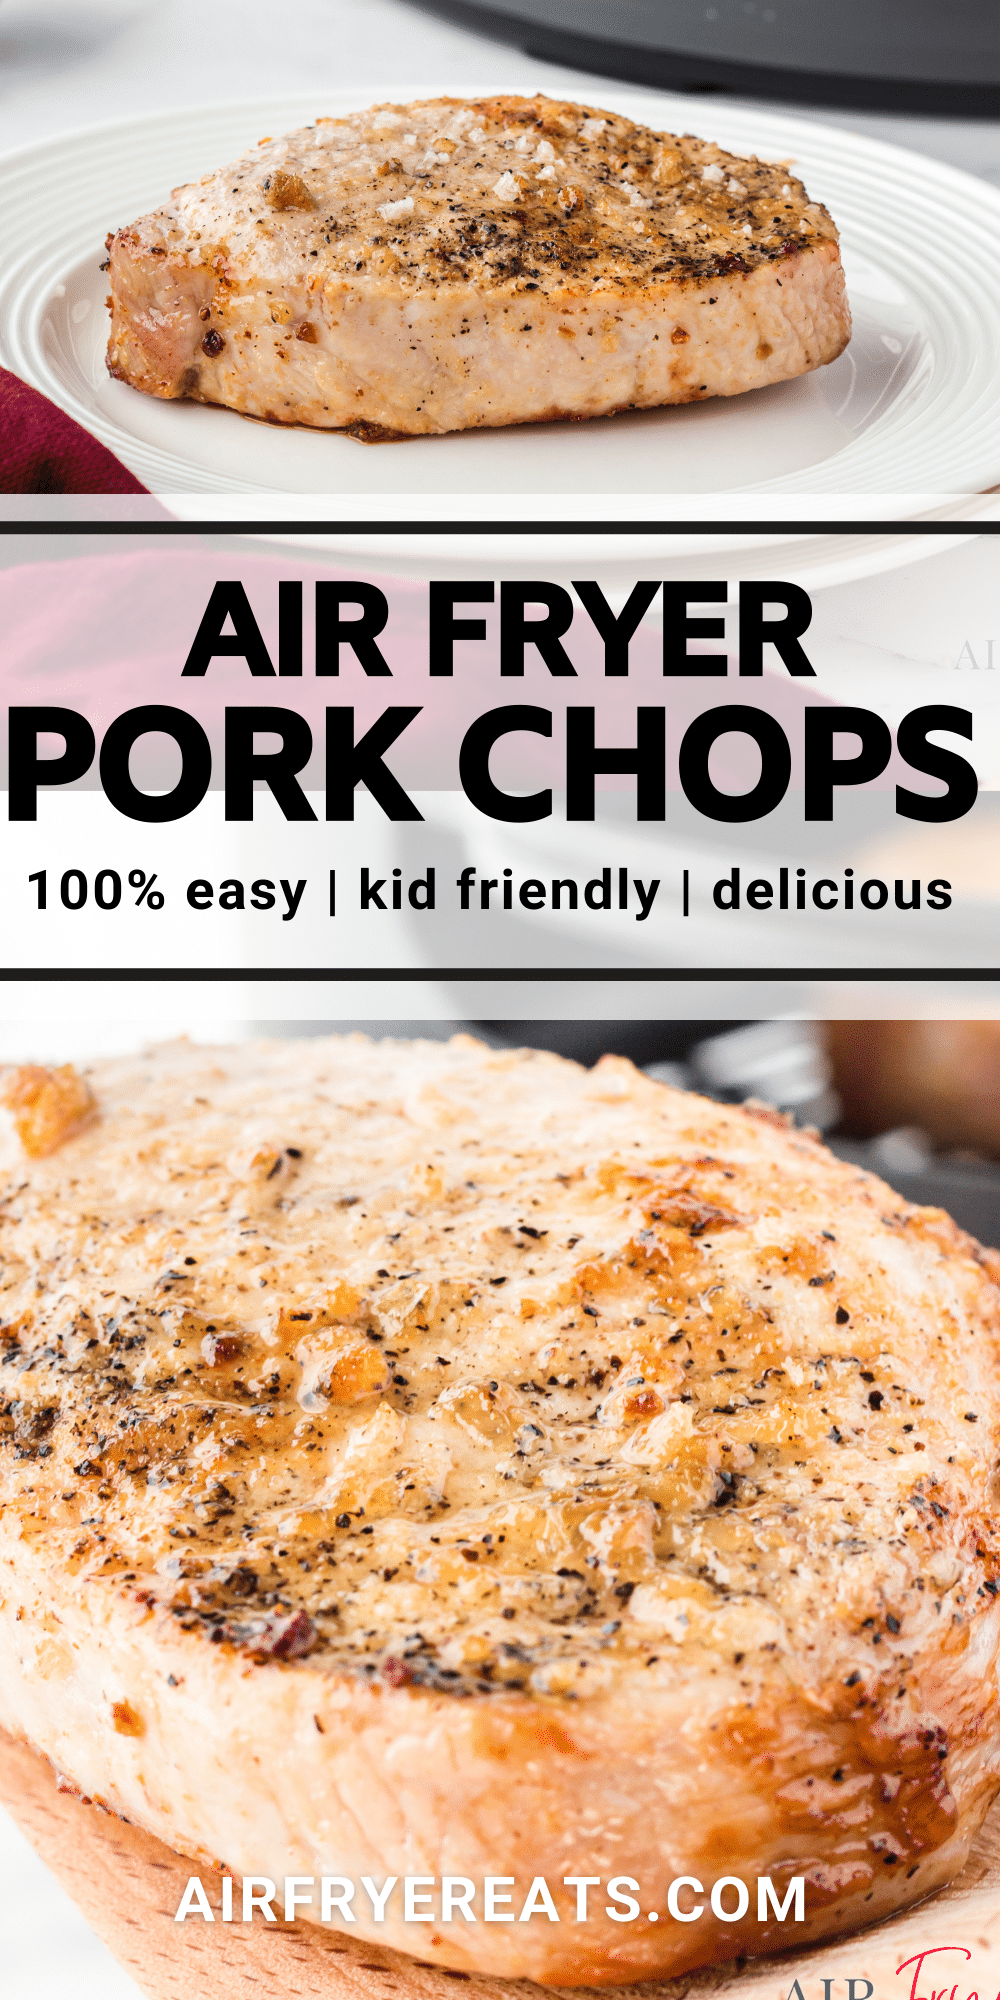 Pork Chops are so easy to air fry in the Ninja Foodi! You'll love how fast these Ninja Foodi Pork Chops are, and how juicy they turn out. via @vegetarianmamma